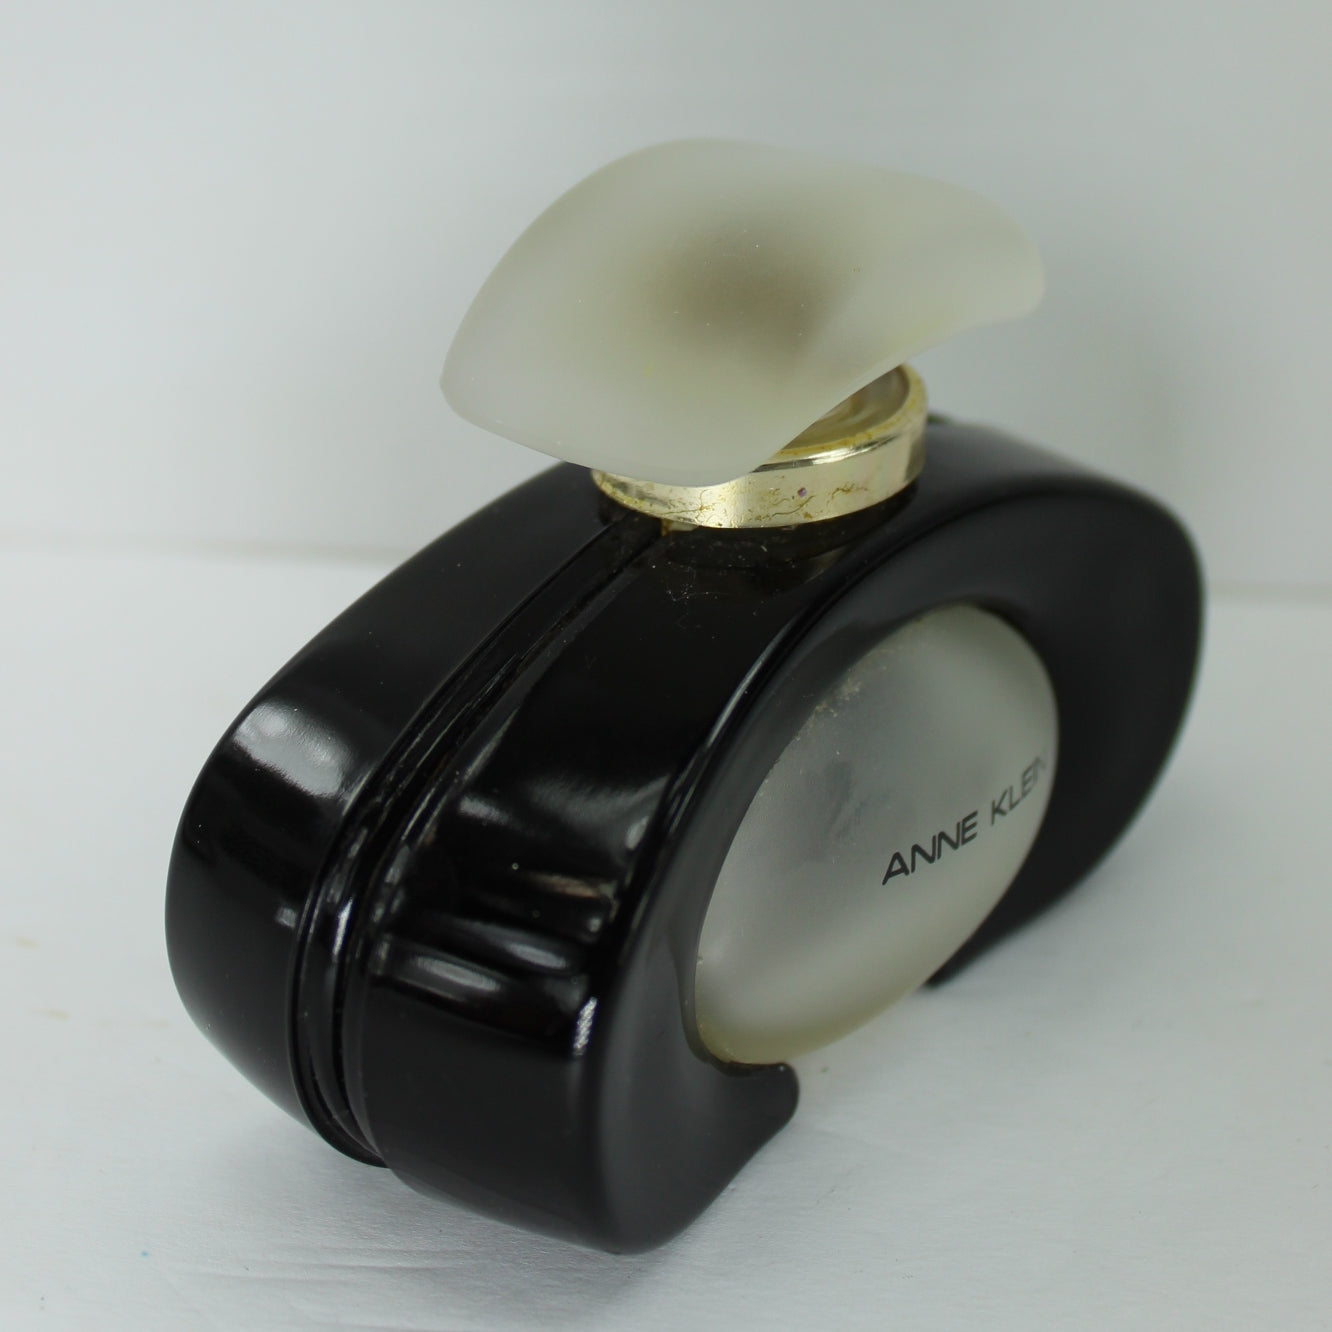 Vintage 1984 Anne Klein Art Deco Empty Collectible Black Frosted Bottle Parlux gorgeous bottle for display refill